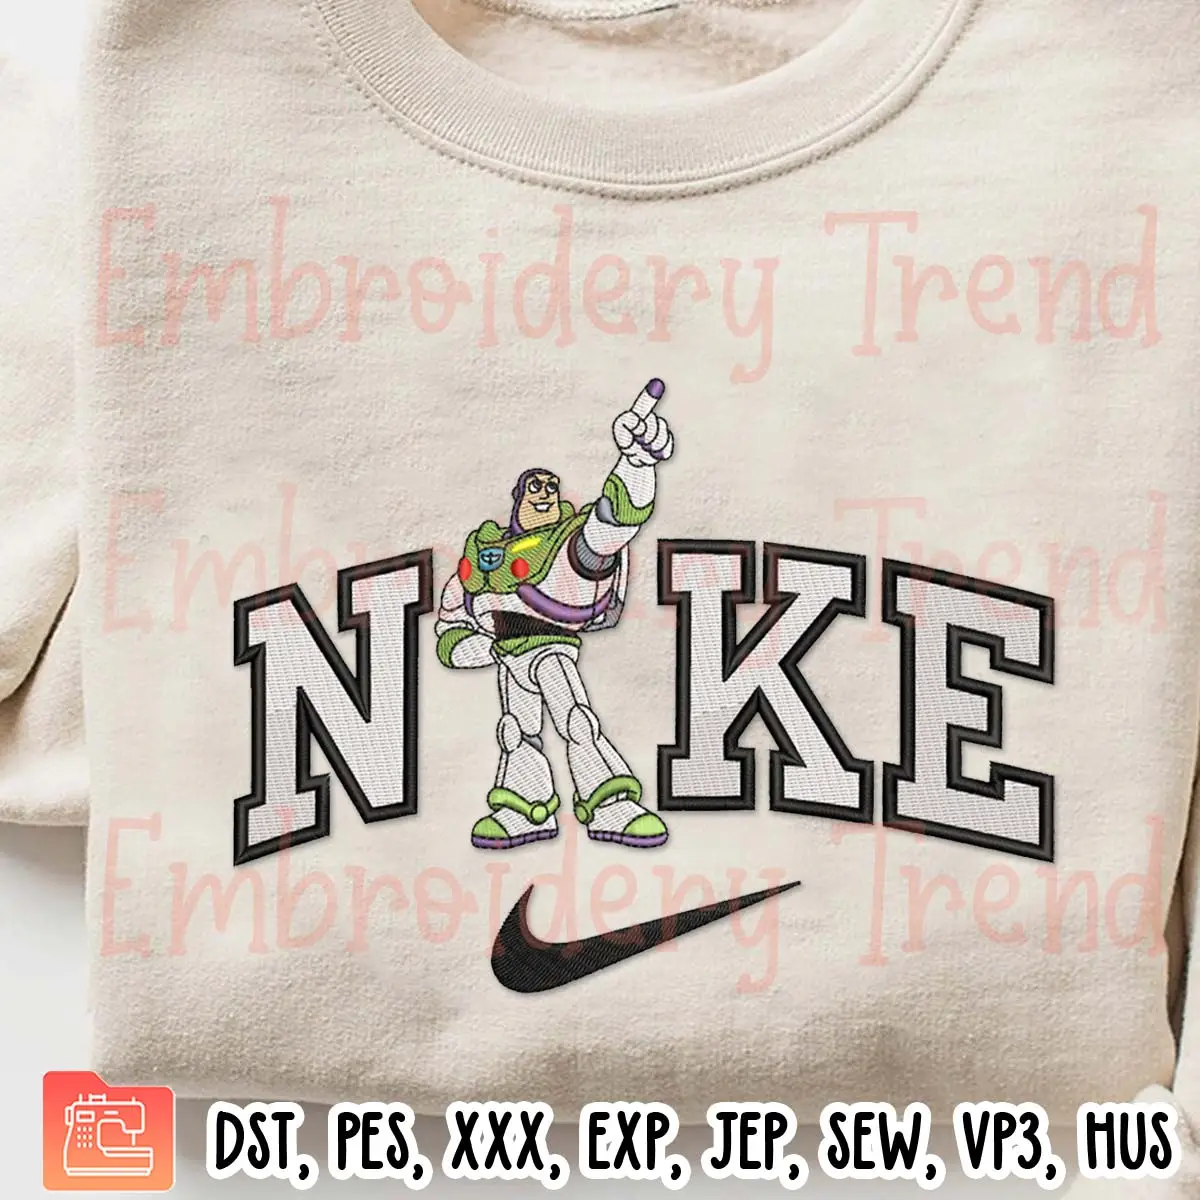 Buzz Lightyear x Nike Embroidery Design, Cartoon Toy Story Embroidery Digitizing File